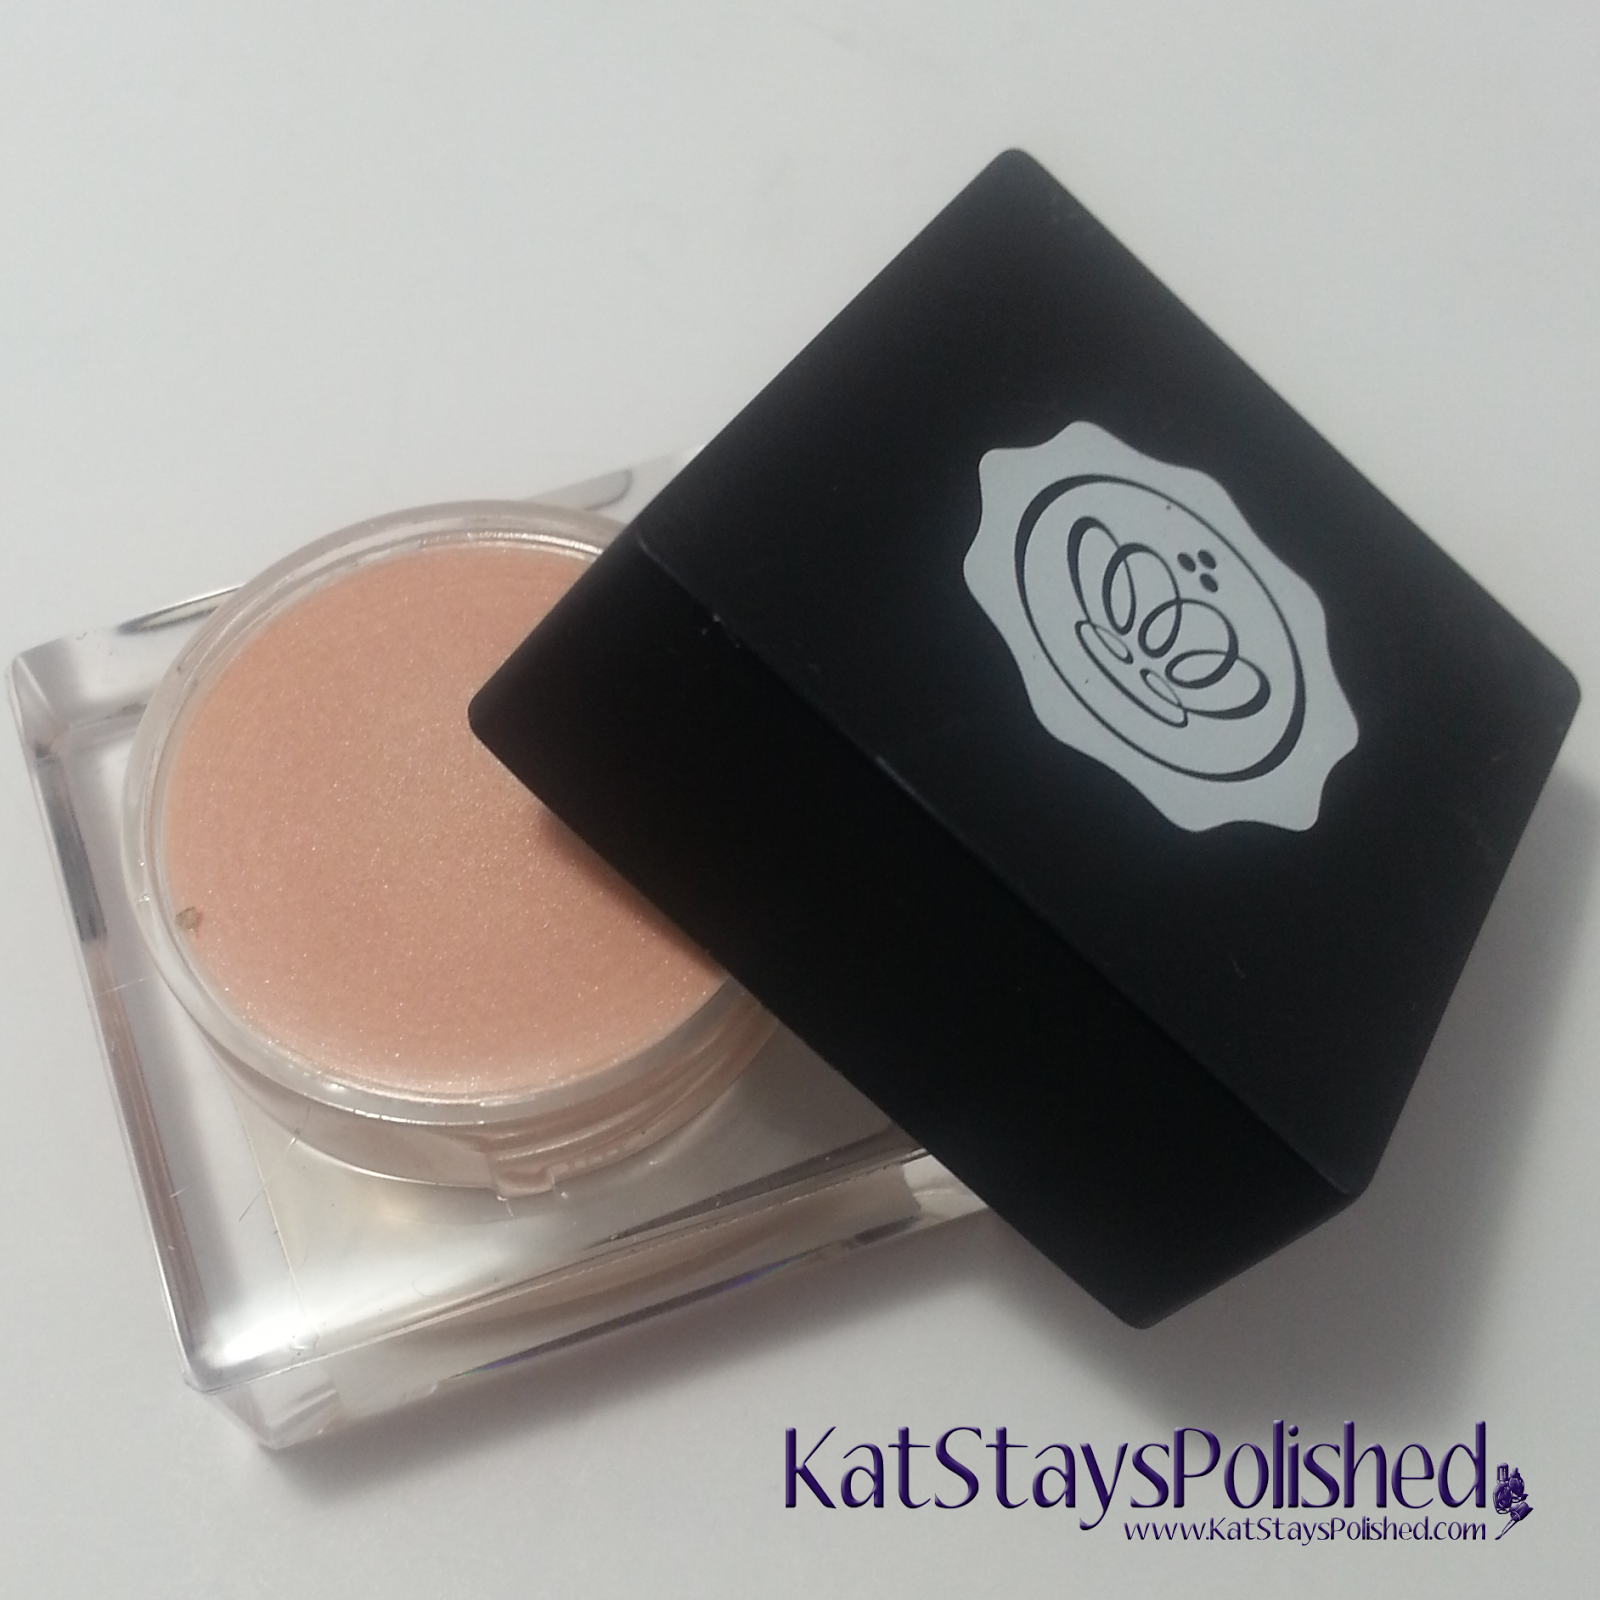 Glossybox - August 2014 - Kryolan for Glossybox Highlighter in Cashmere | Kat Stays Polished